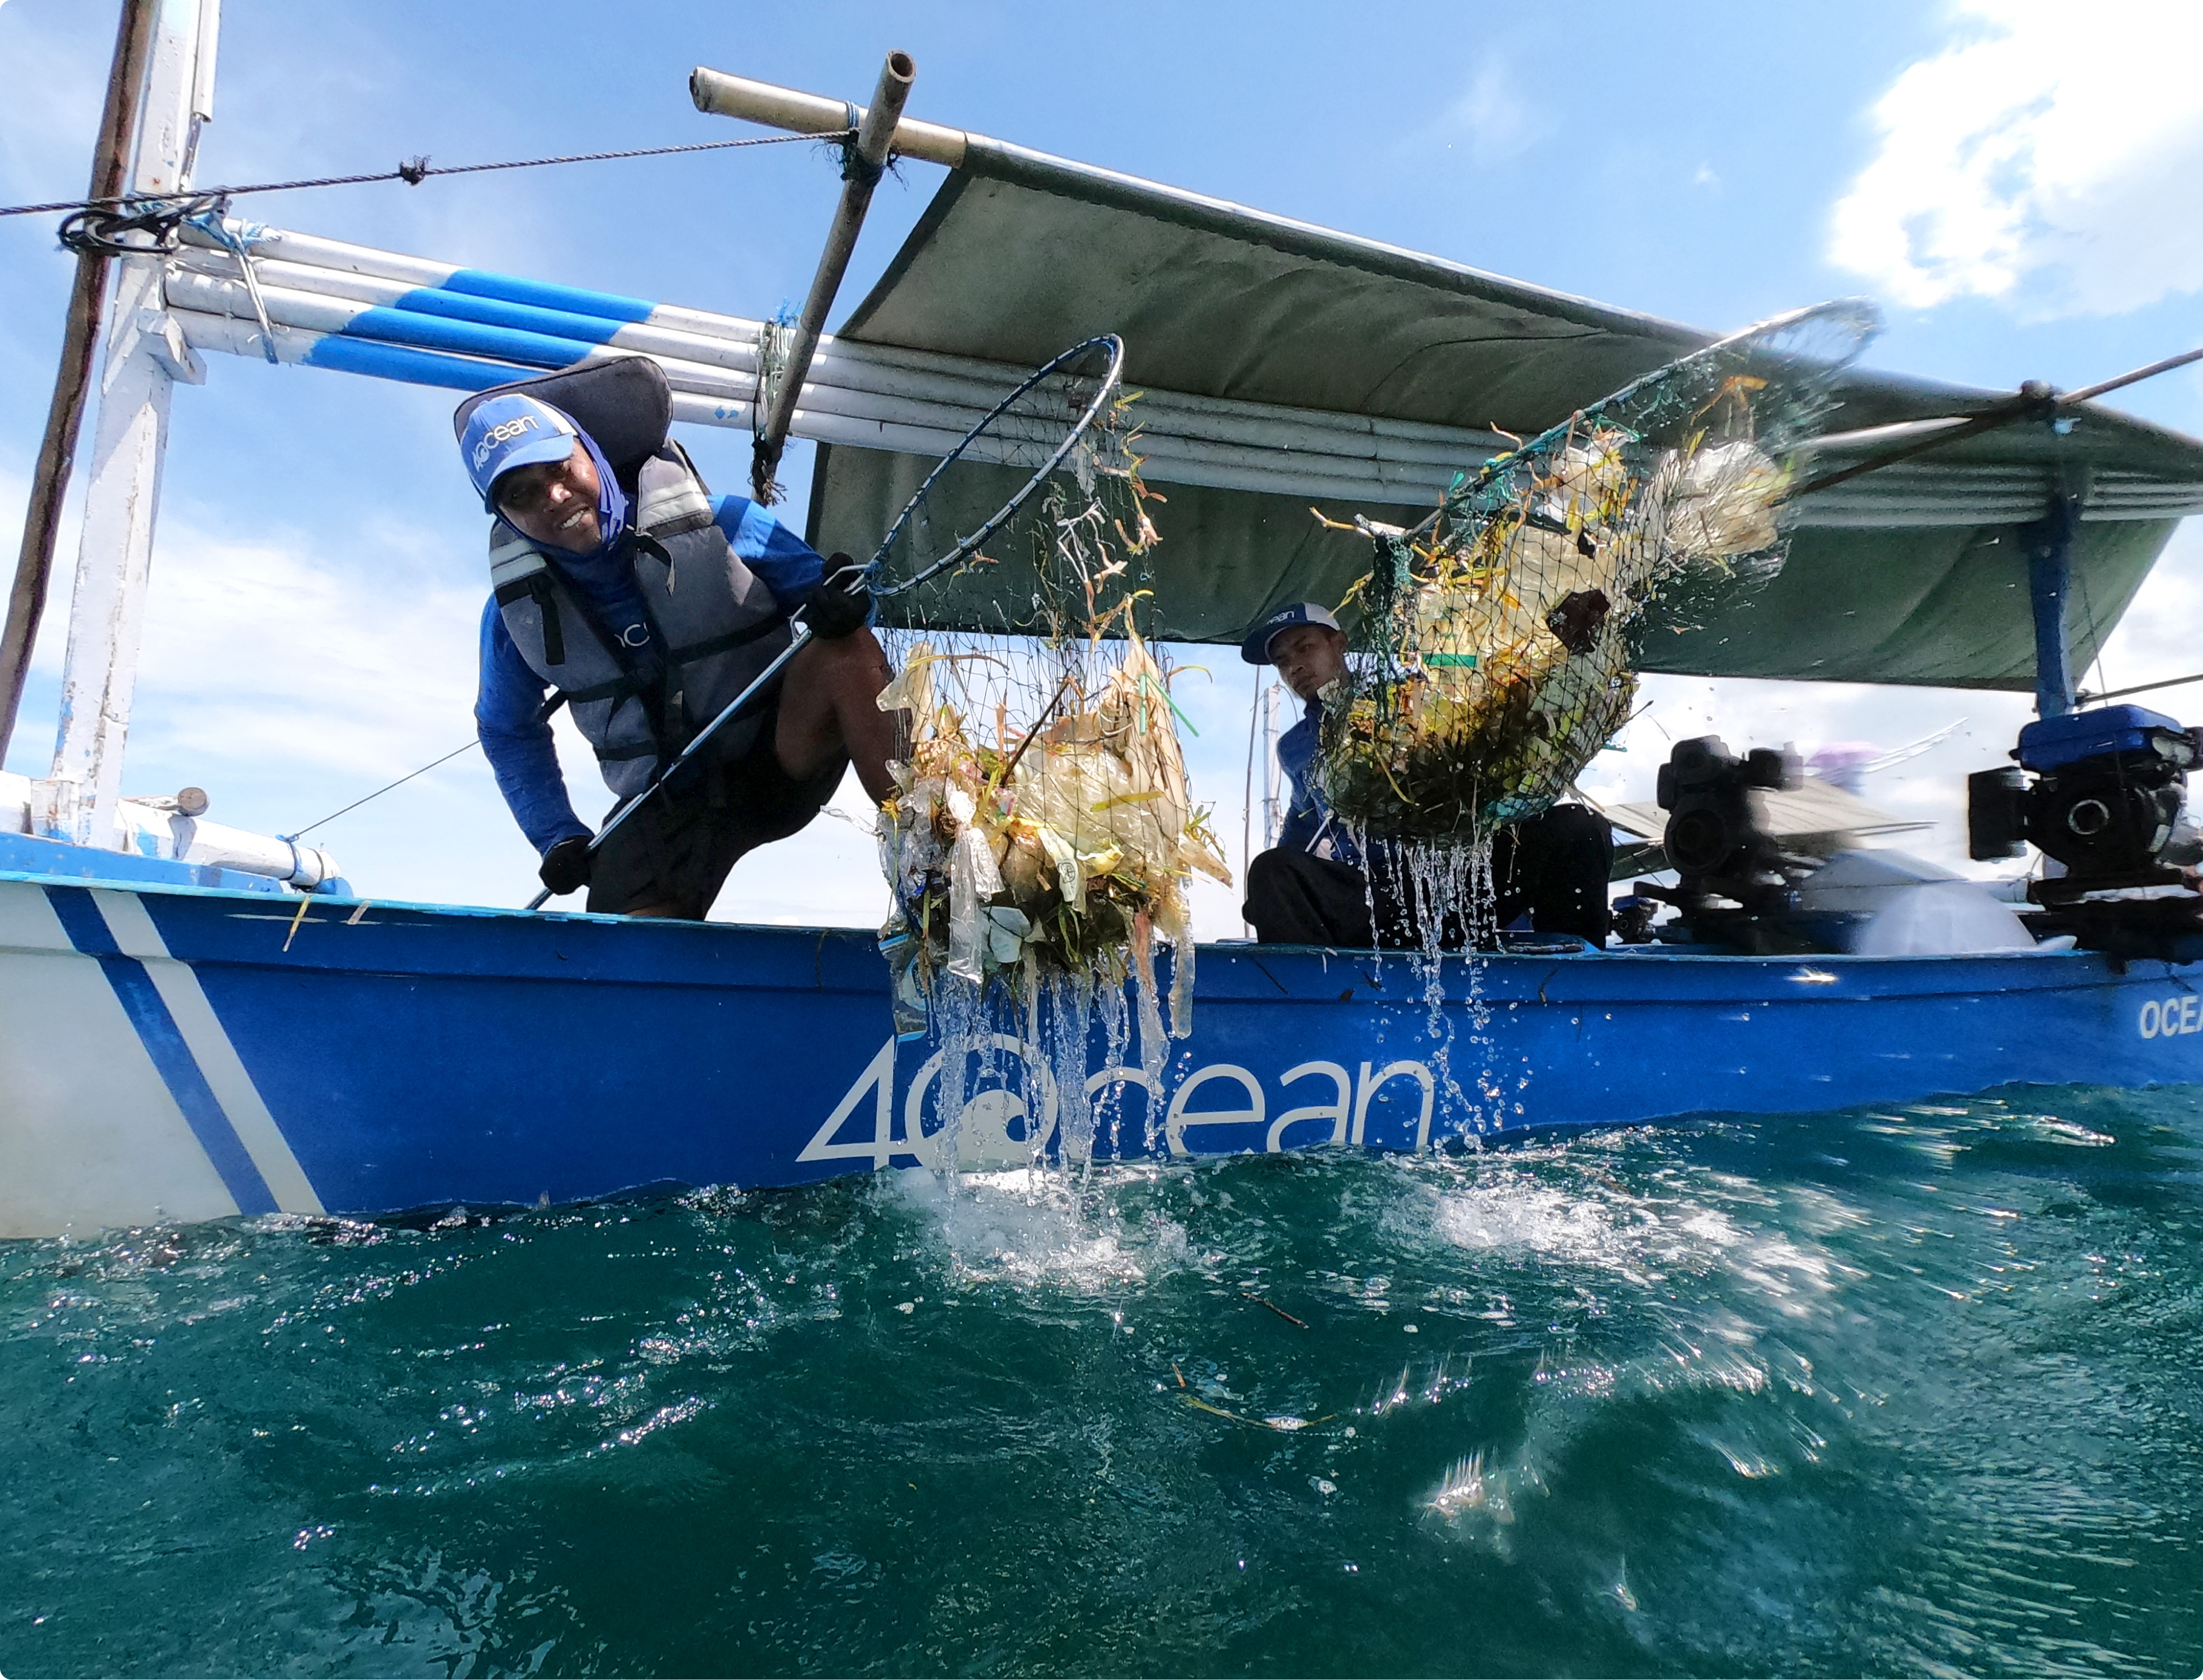 Two 4ocean volunteers lifting trash from the ocean with a net.